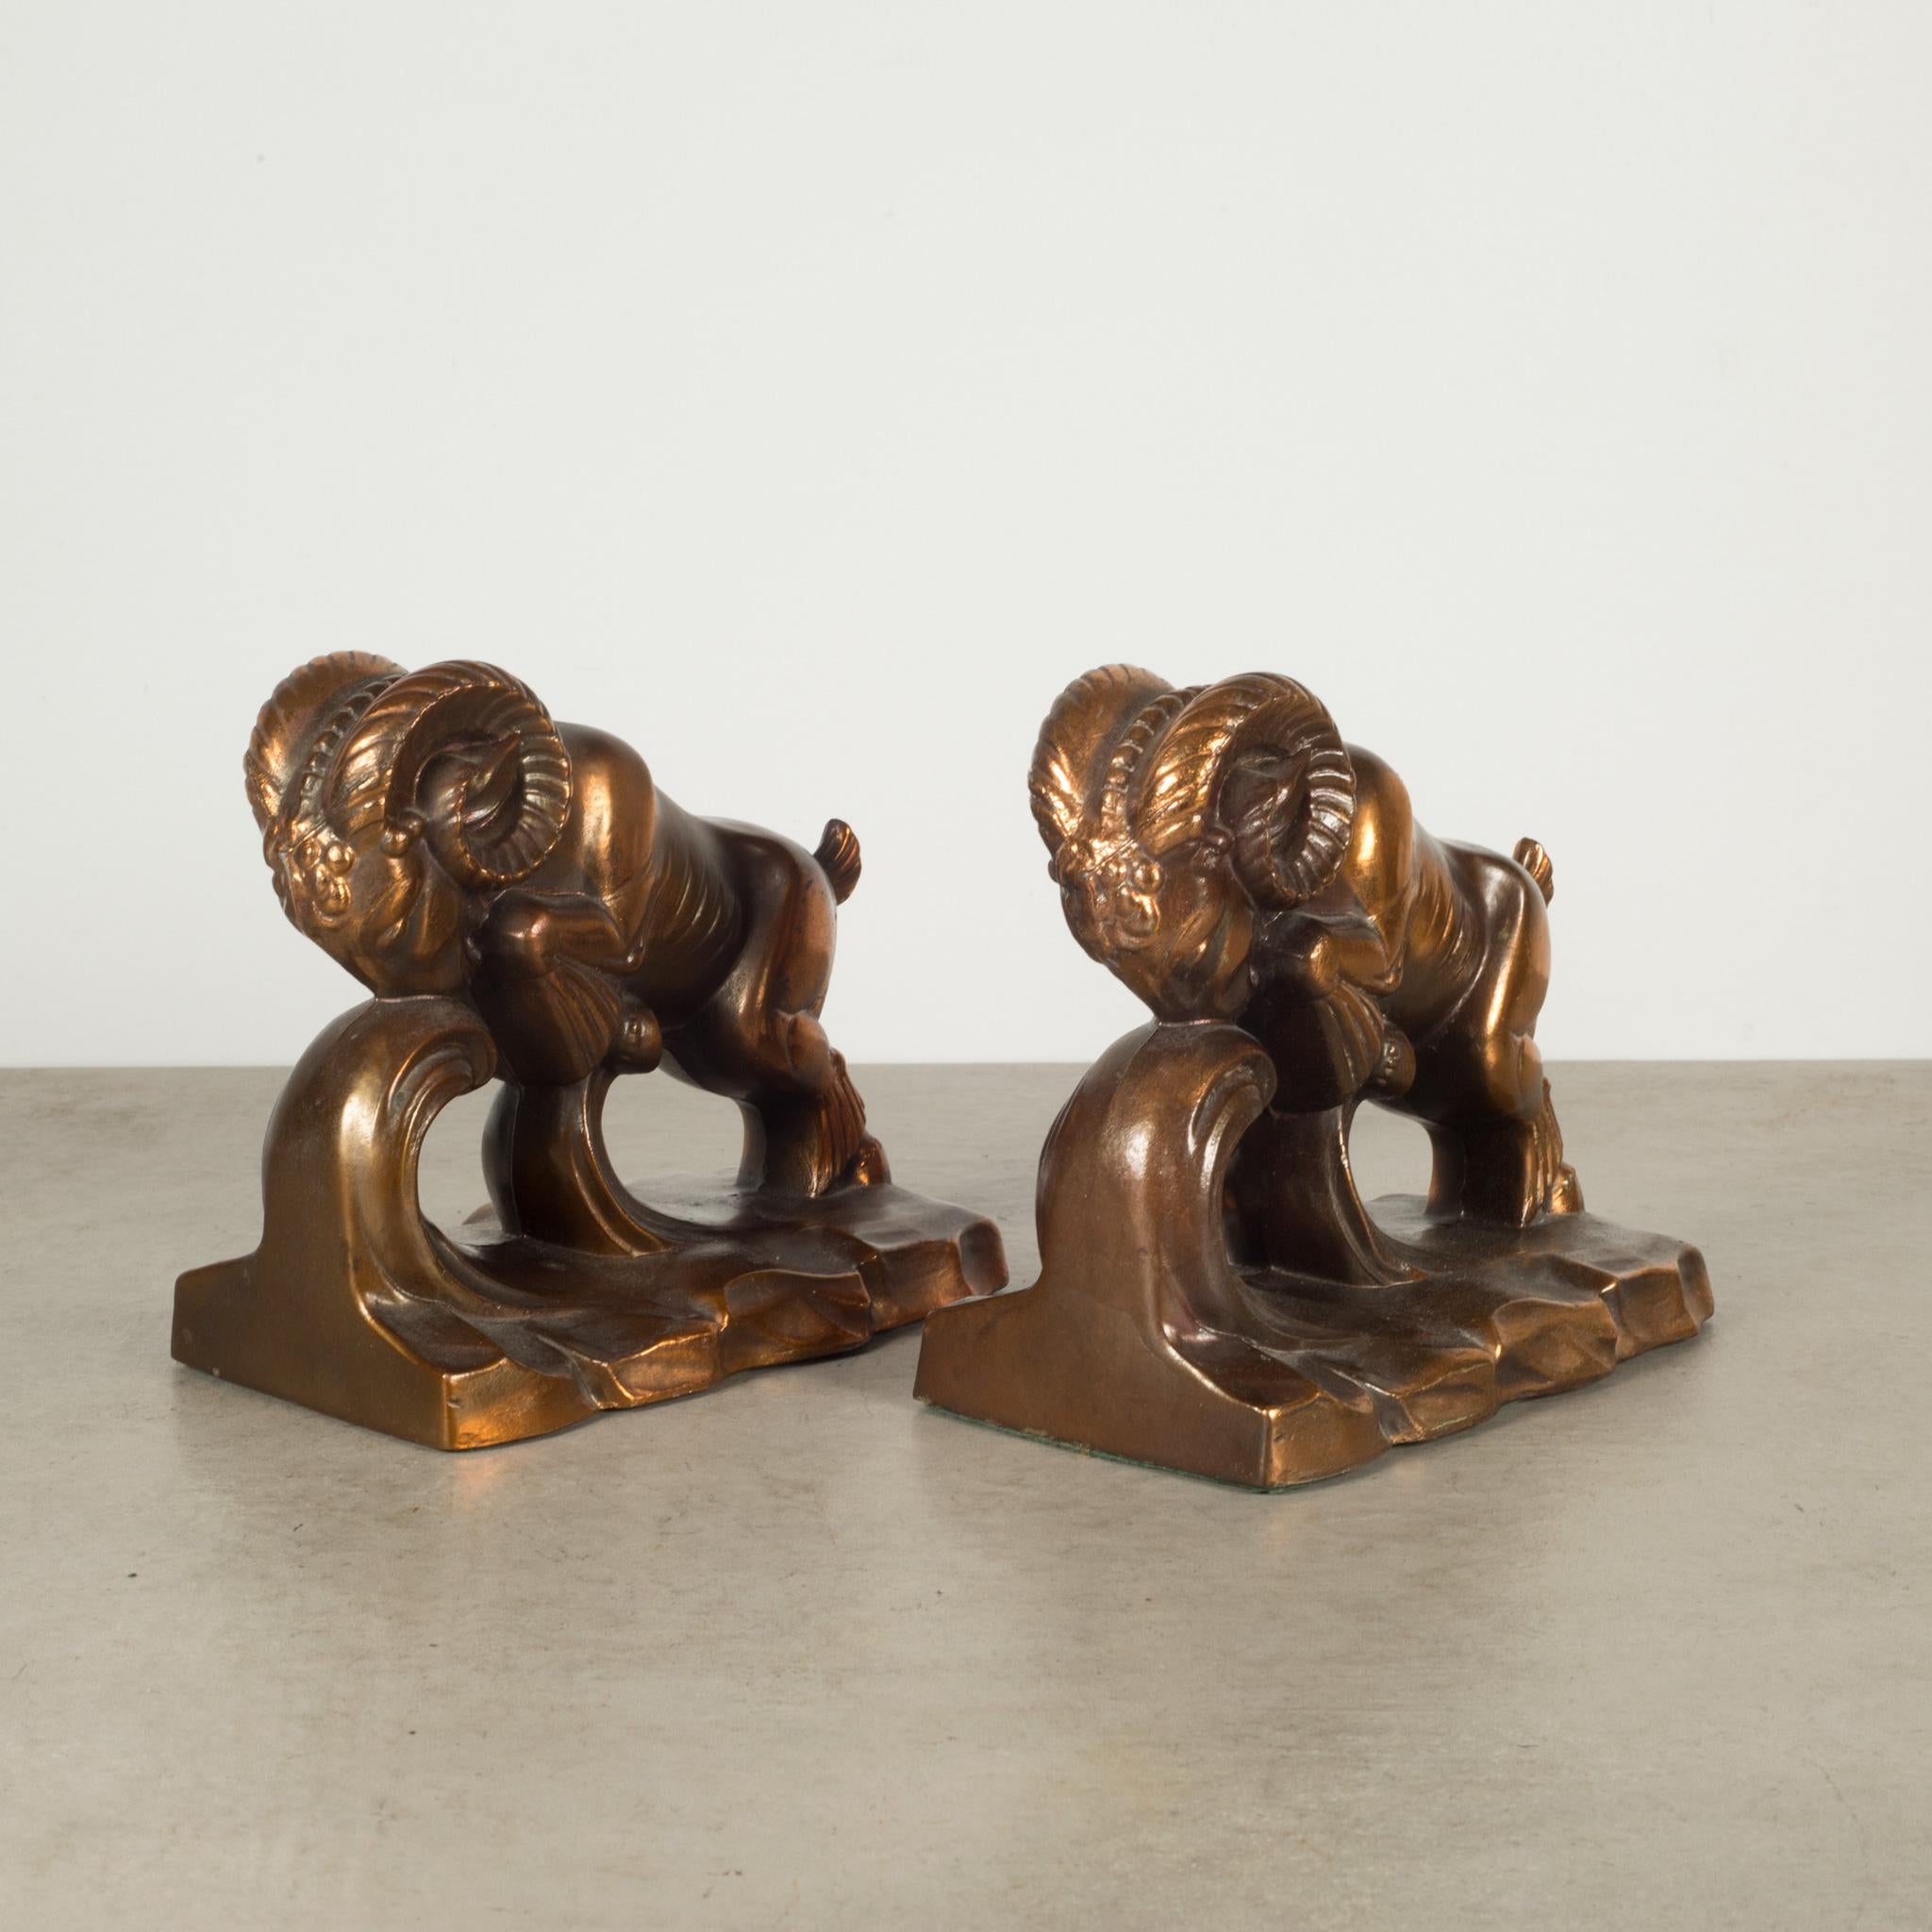 ABOUT

A pair of bronze finish stylized mid-century ram bookends. Both bookends retain their original felt on the bottom.

 CREATOR Unknown.
 DATE OF MANUFACTURE c.1950.
 MATERIALS AND TECHNIQUES Bronze Finish, Felt.
 CONDITION Good. Wear